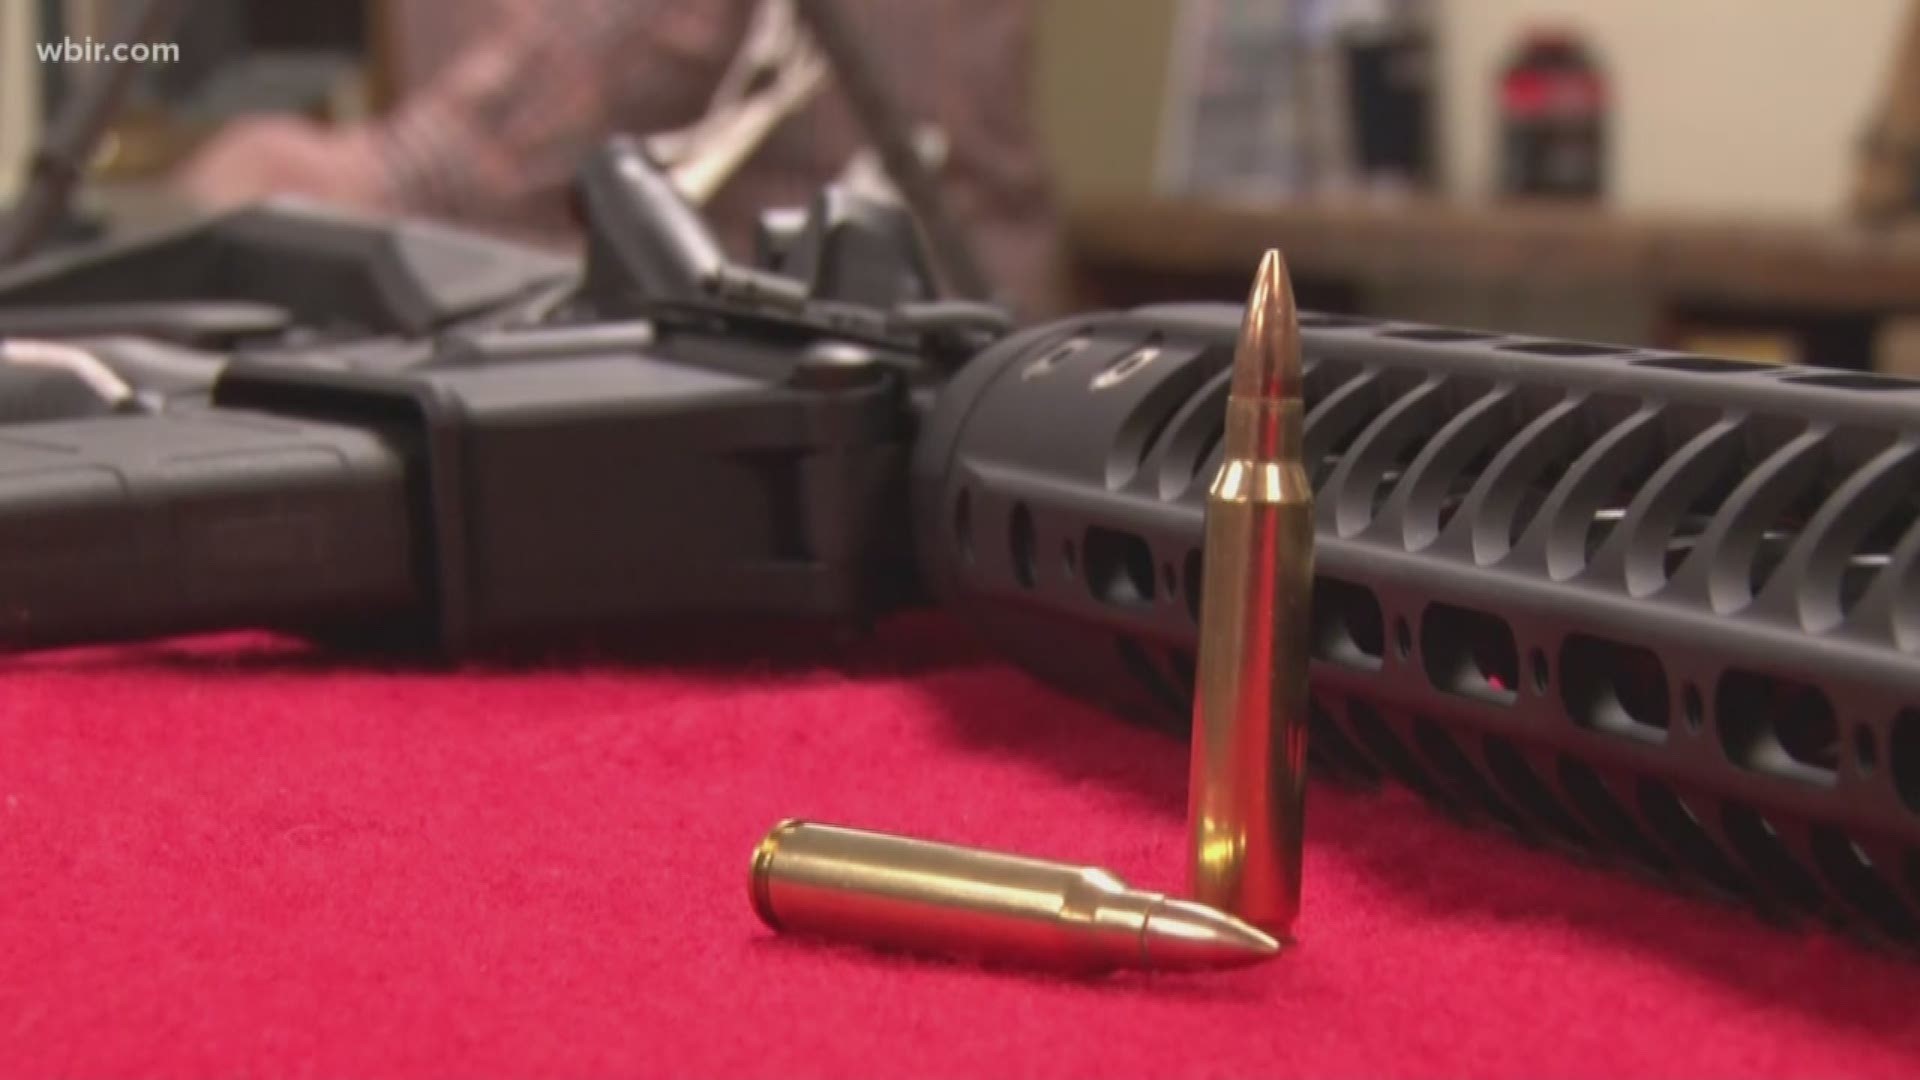 Blount County is now the second county in Tennessee to become a Second Amendment sanctuary. It is a symbolic move by commission, but supporters say it sends a message that Blount County will protect citizens from tighter gun laws.